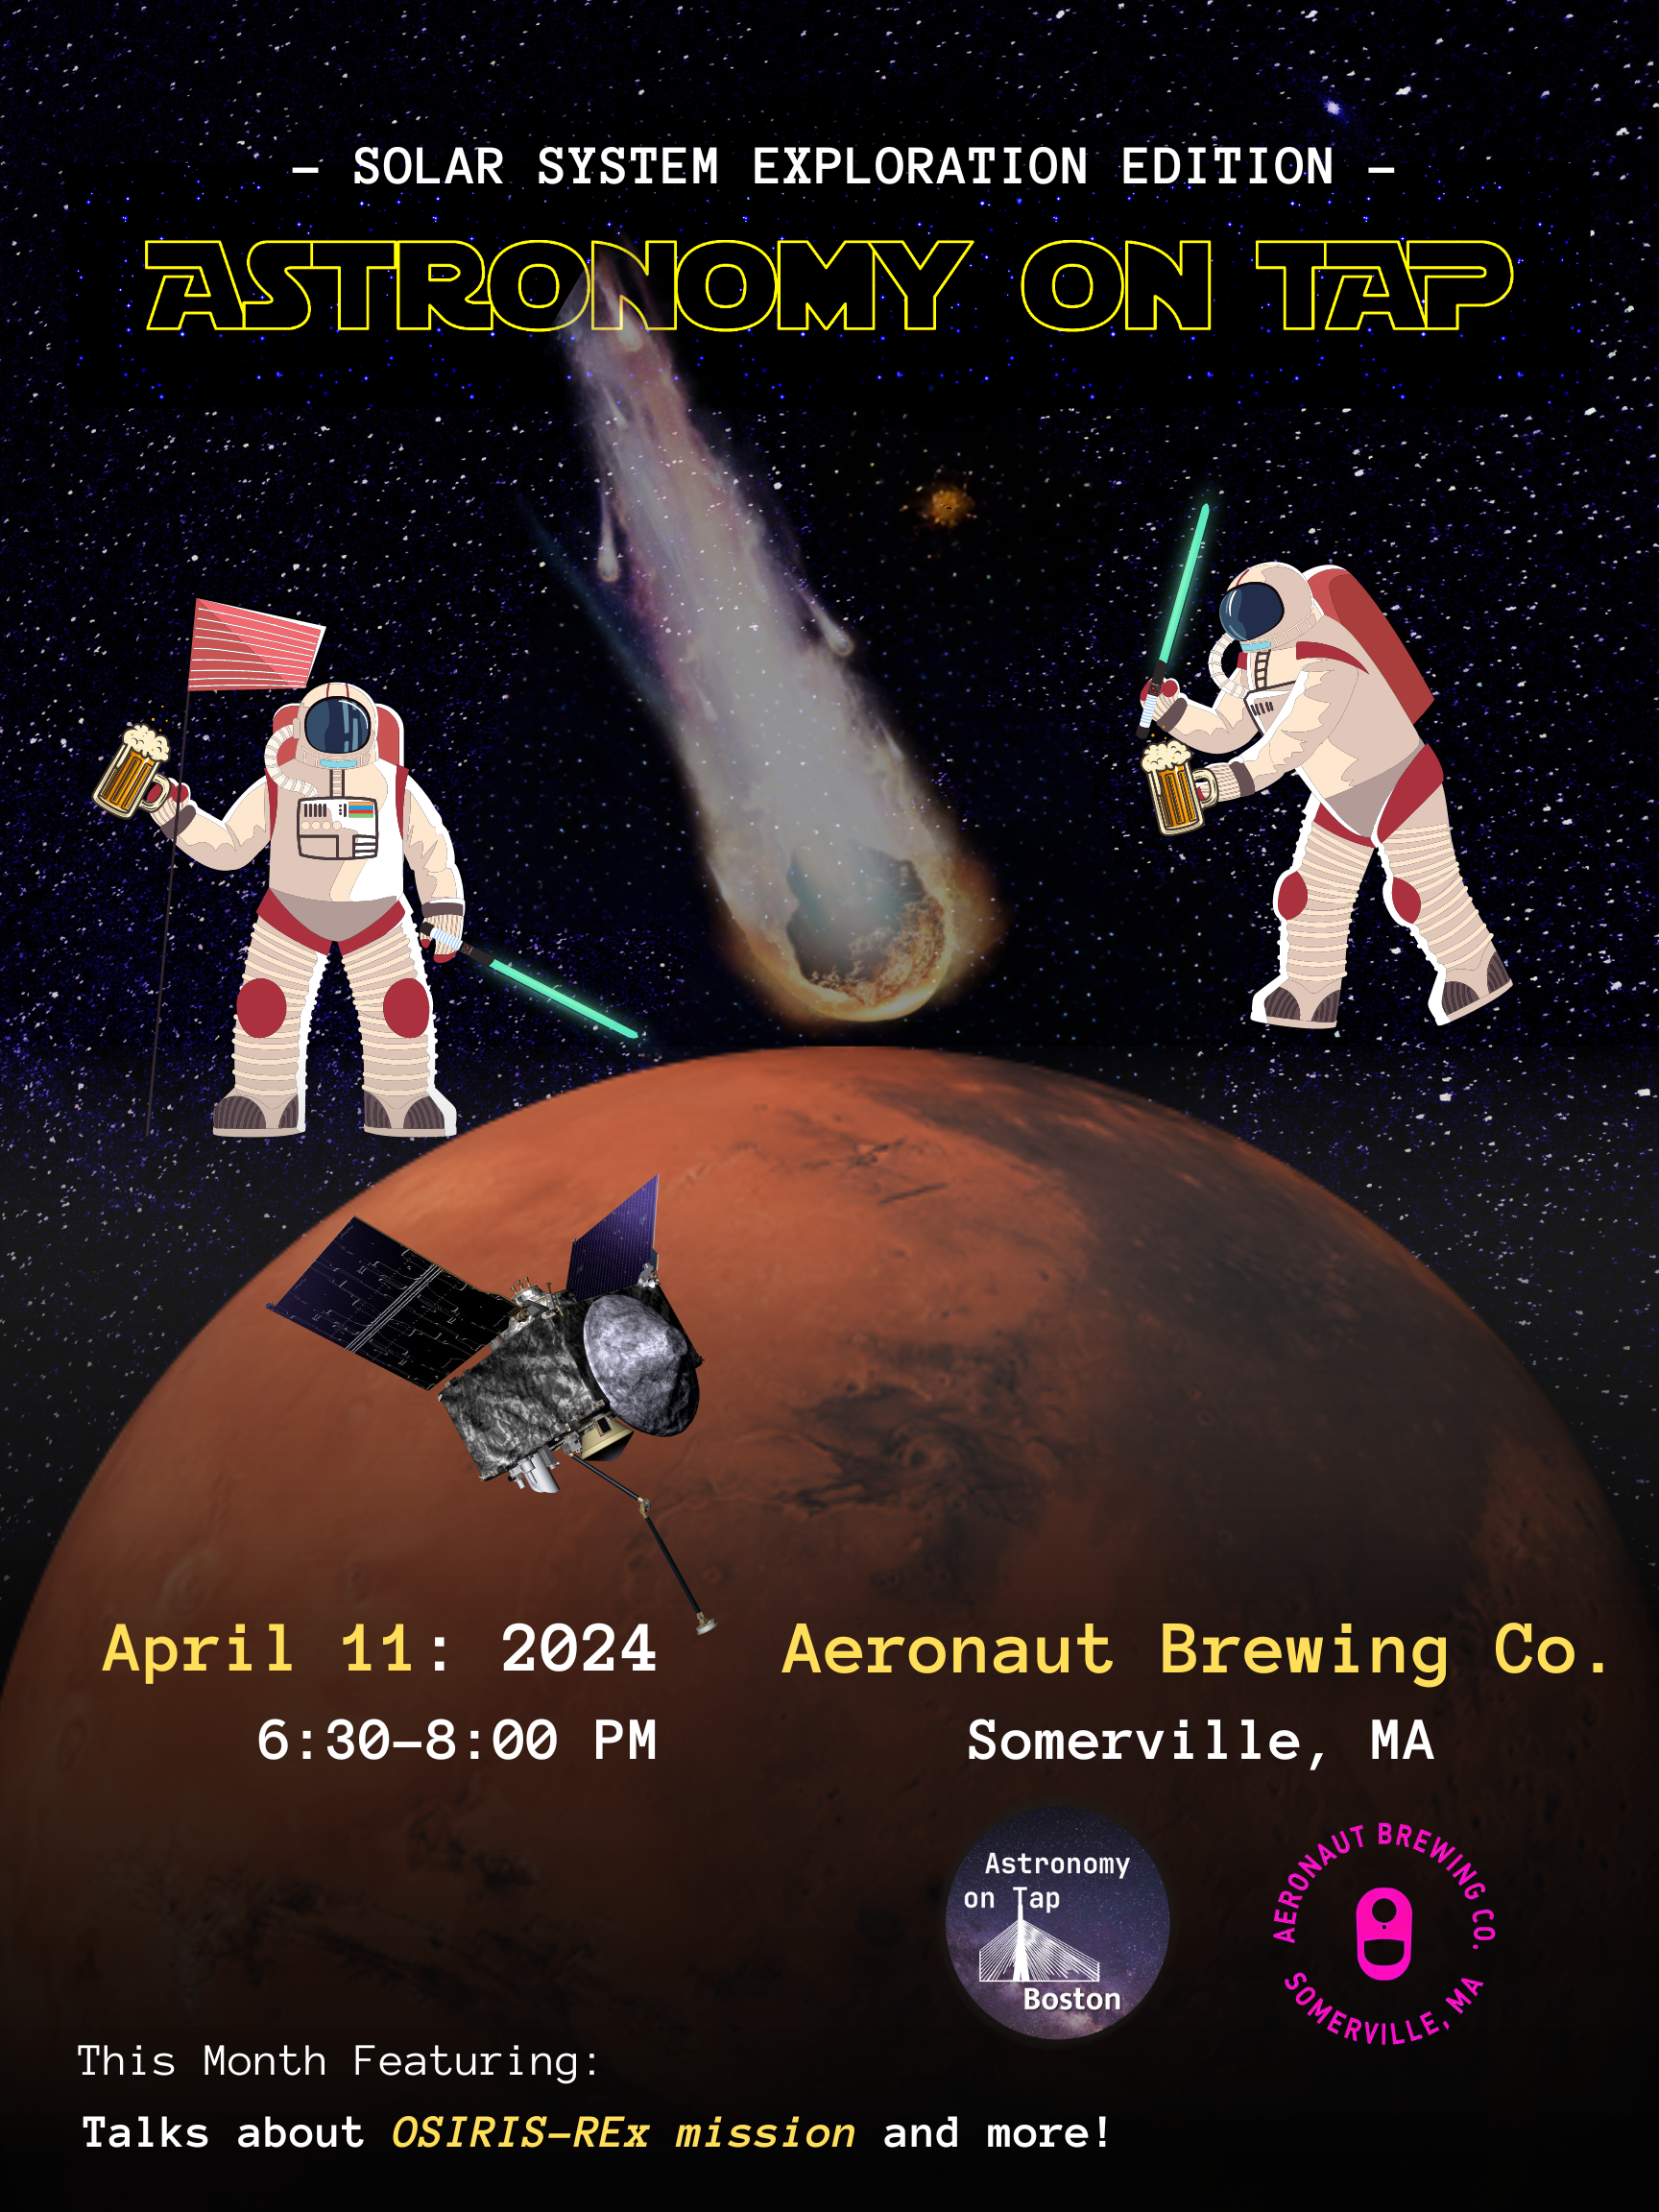 Poster advertising Astronomy on Tap event for AoT Boston. To occur on April 11, 2024 from 6:30-8pm at Aeronaut Brewing Co in Somerville, MA